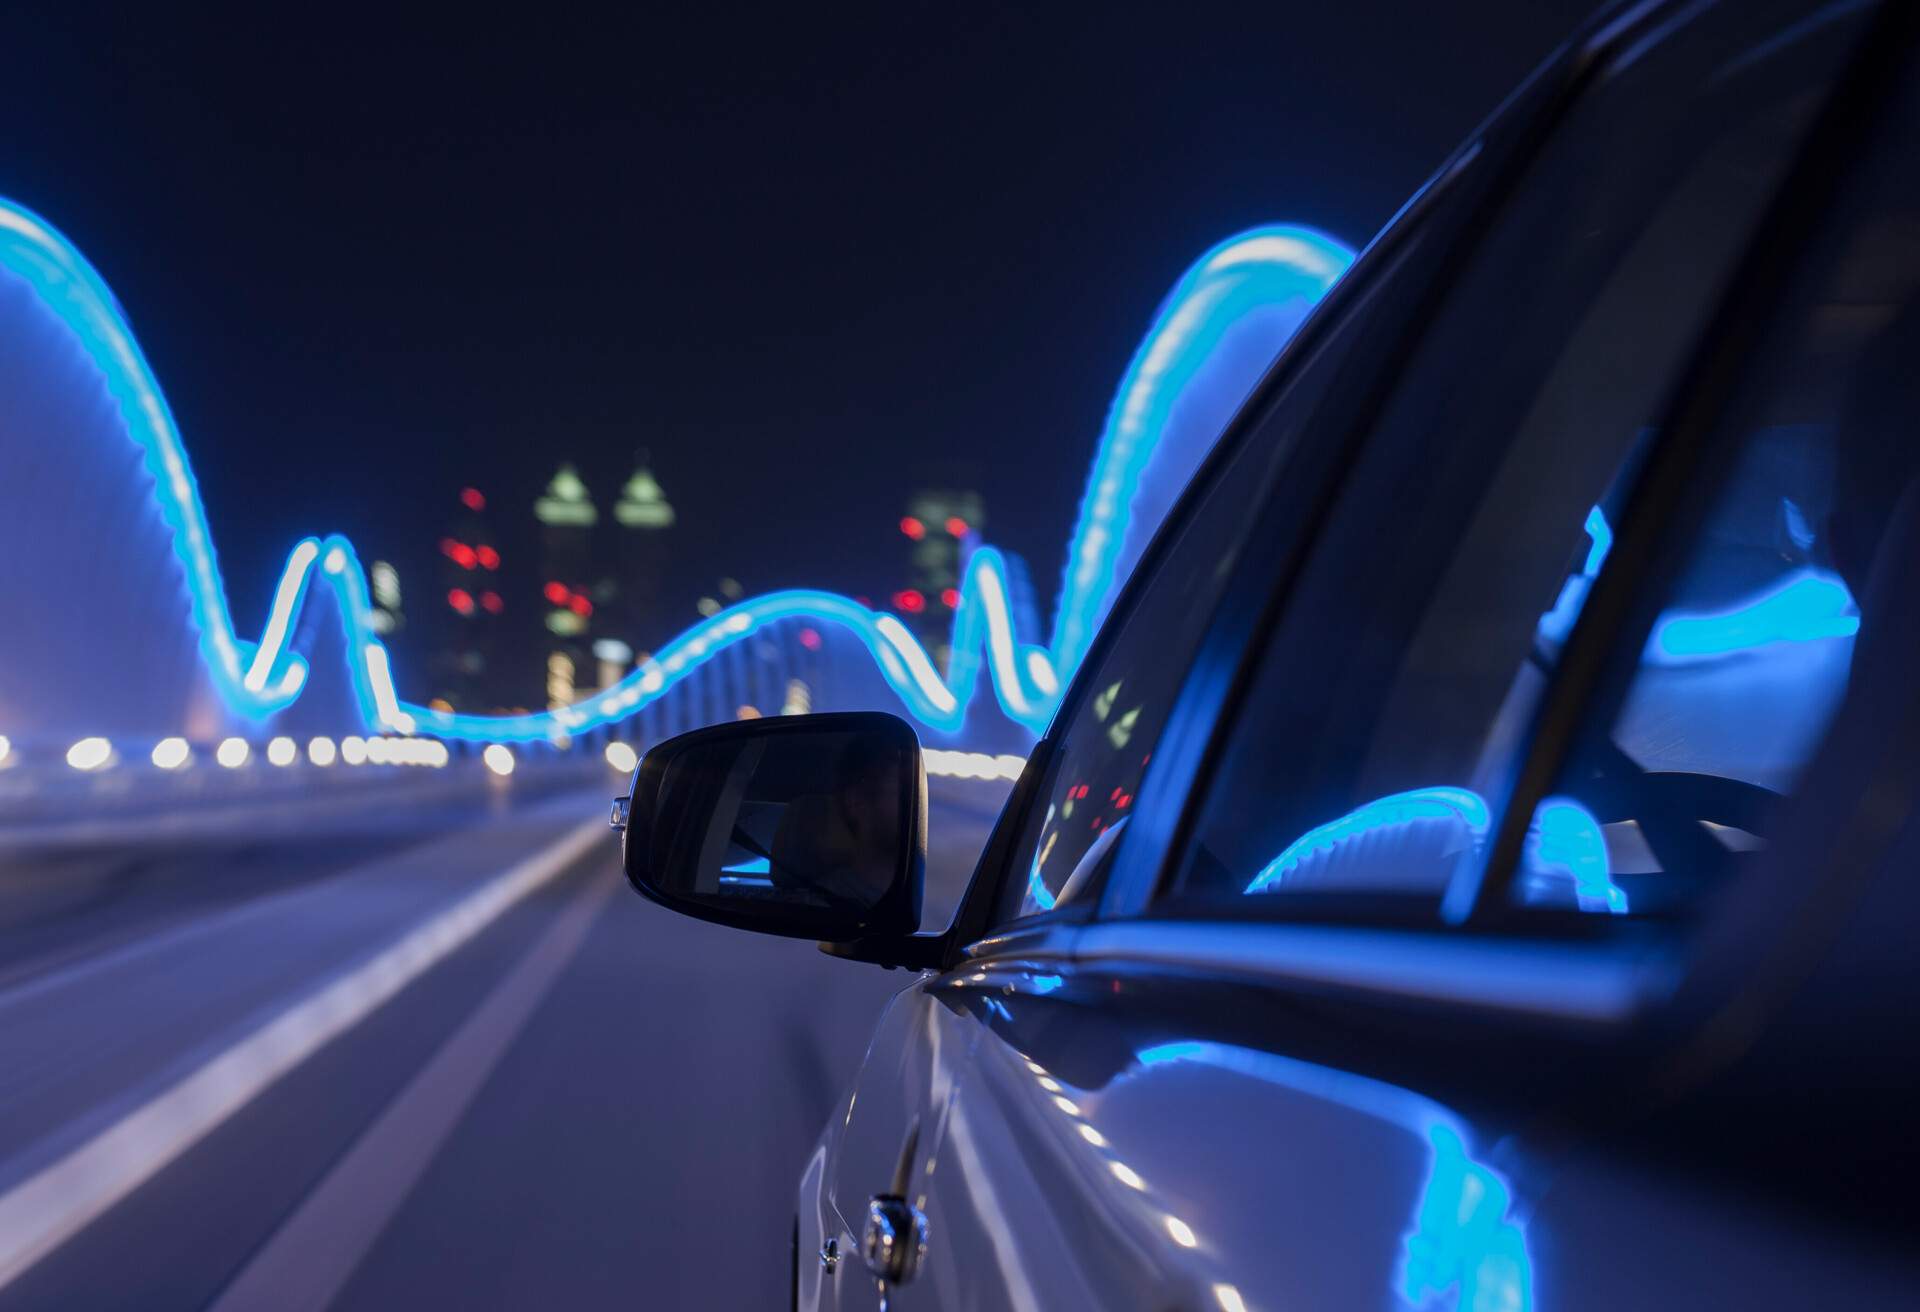 A car driving across a neon-lit bridge at night with lights reflecting on the car's surface.